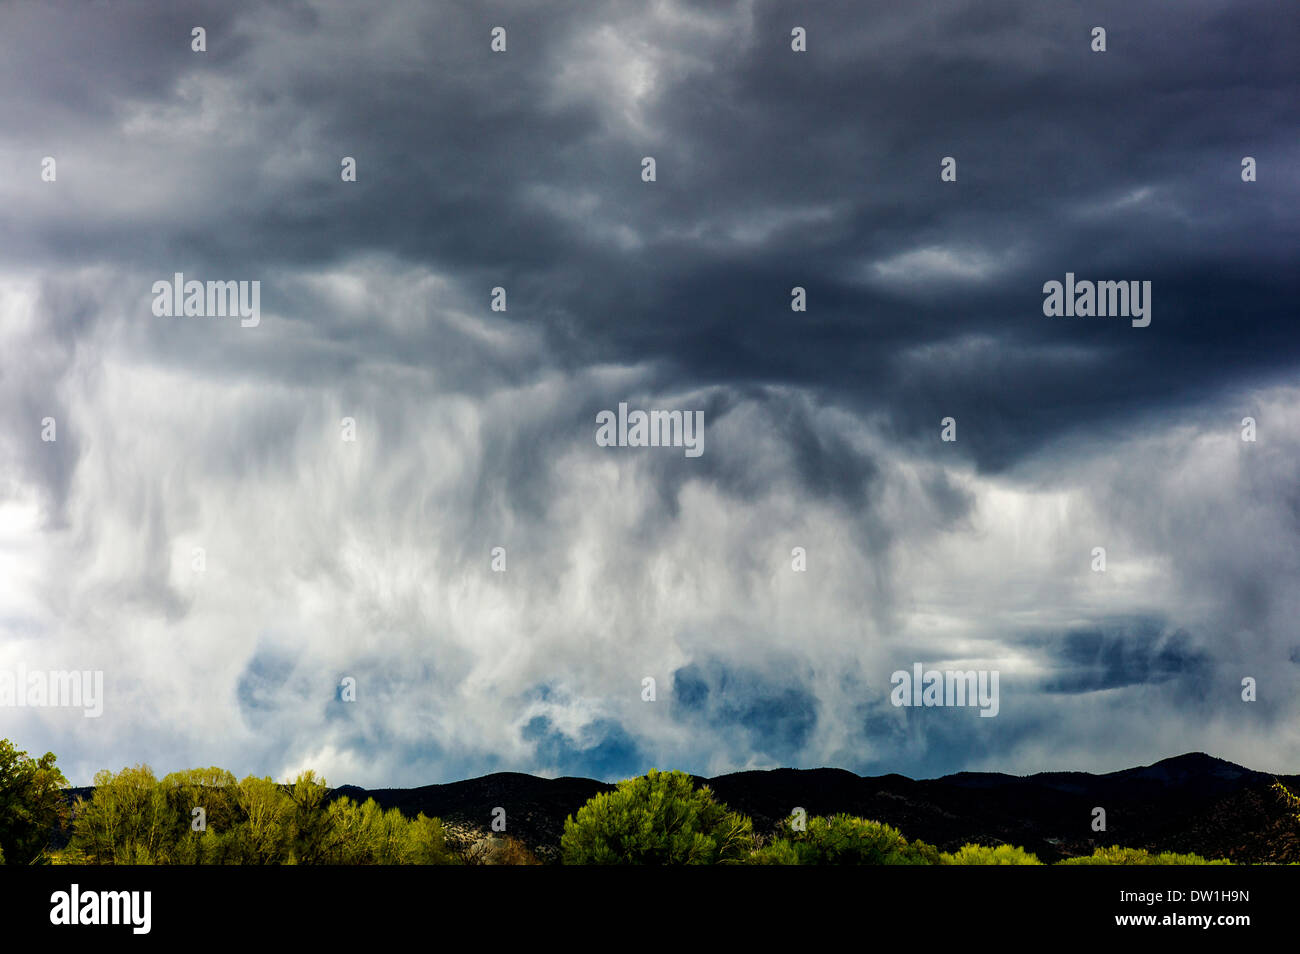 Storm clouds over the small mountain town of Salida, Colorado, USA Stock Photo